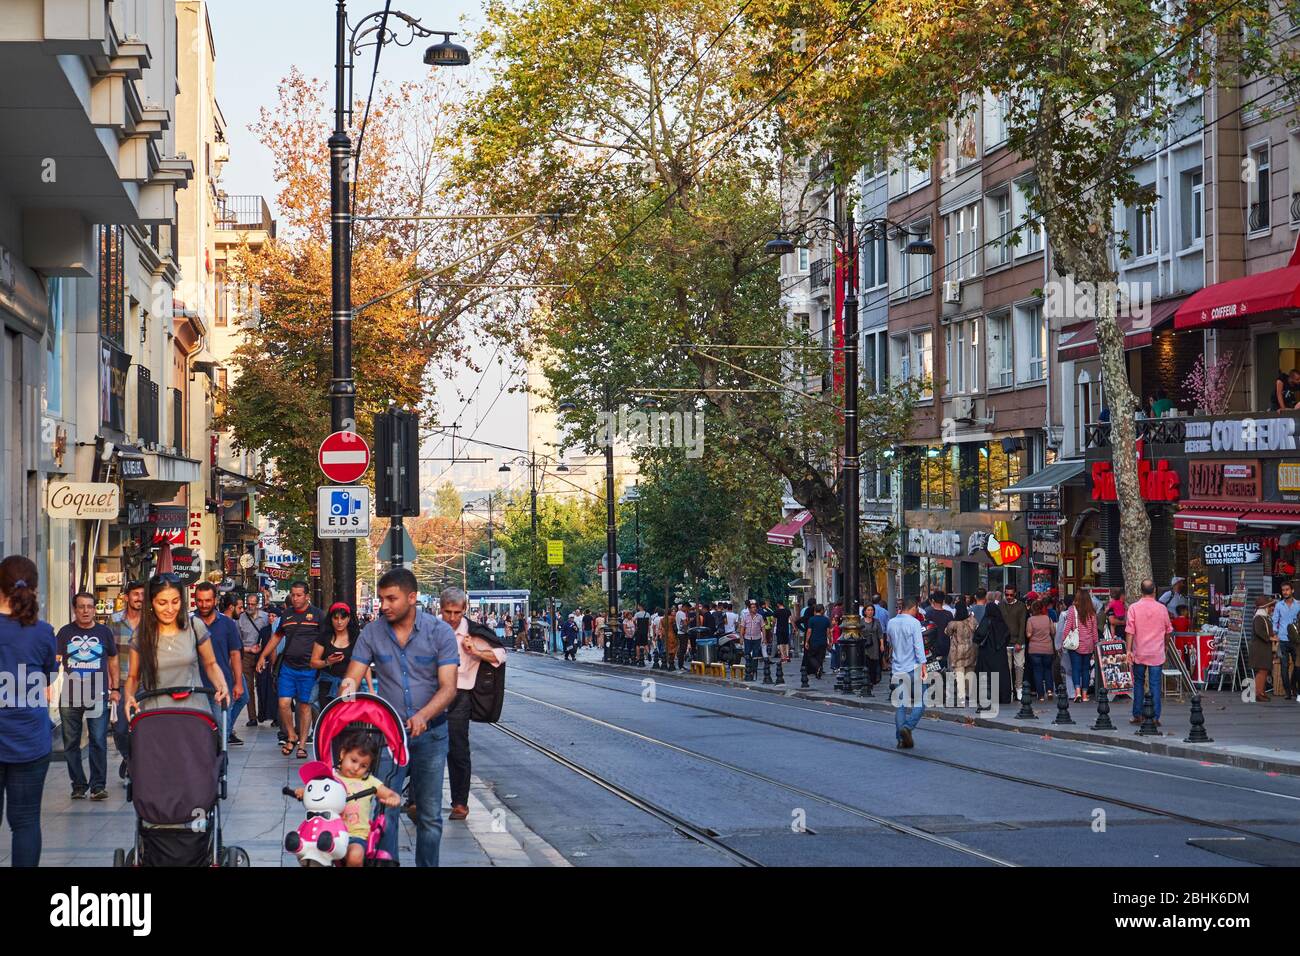 Istanbul, Turkey- September 17, 2017:Citizens and tourists flock to the downtown streets full of shops and restaurants Stock Photo